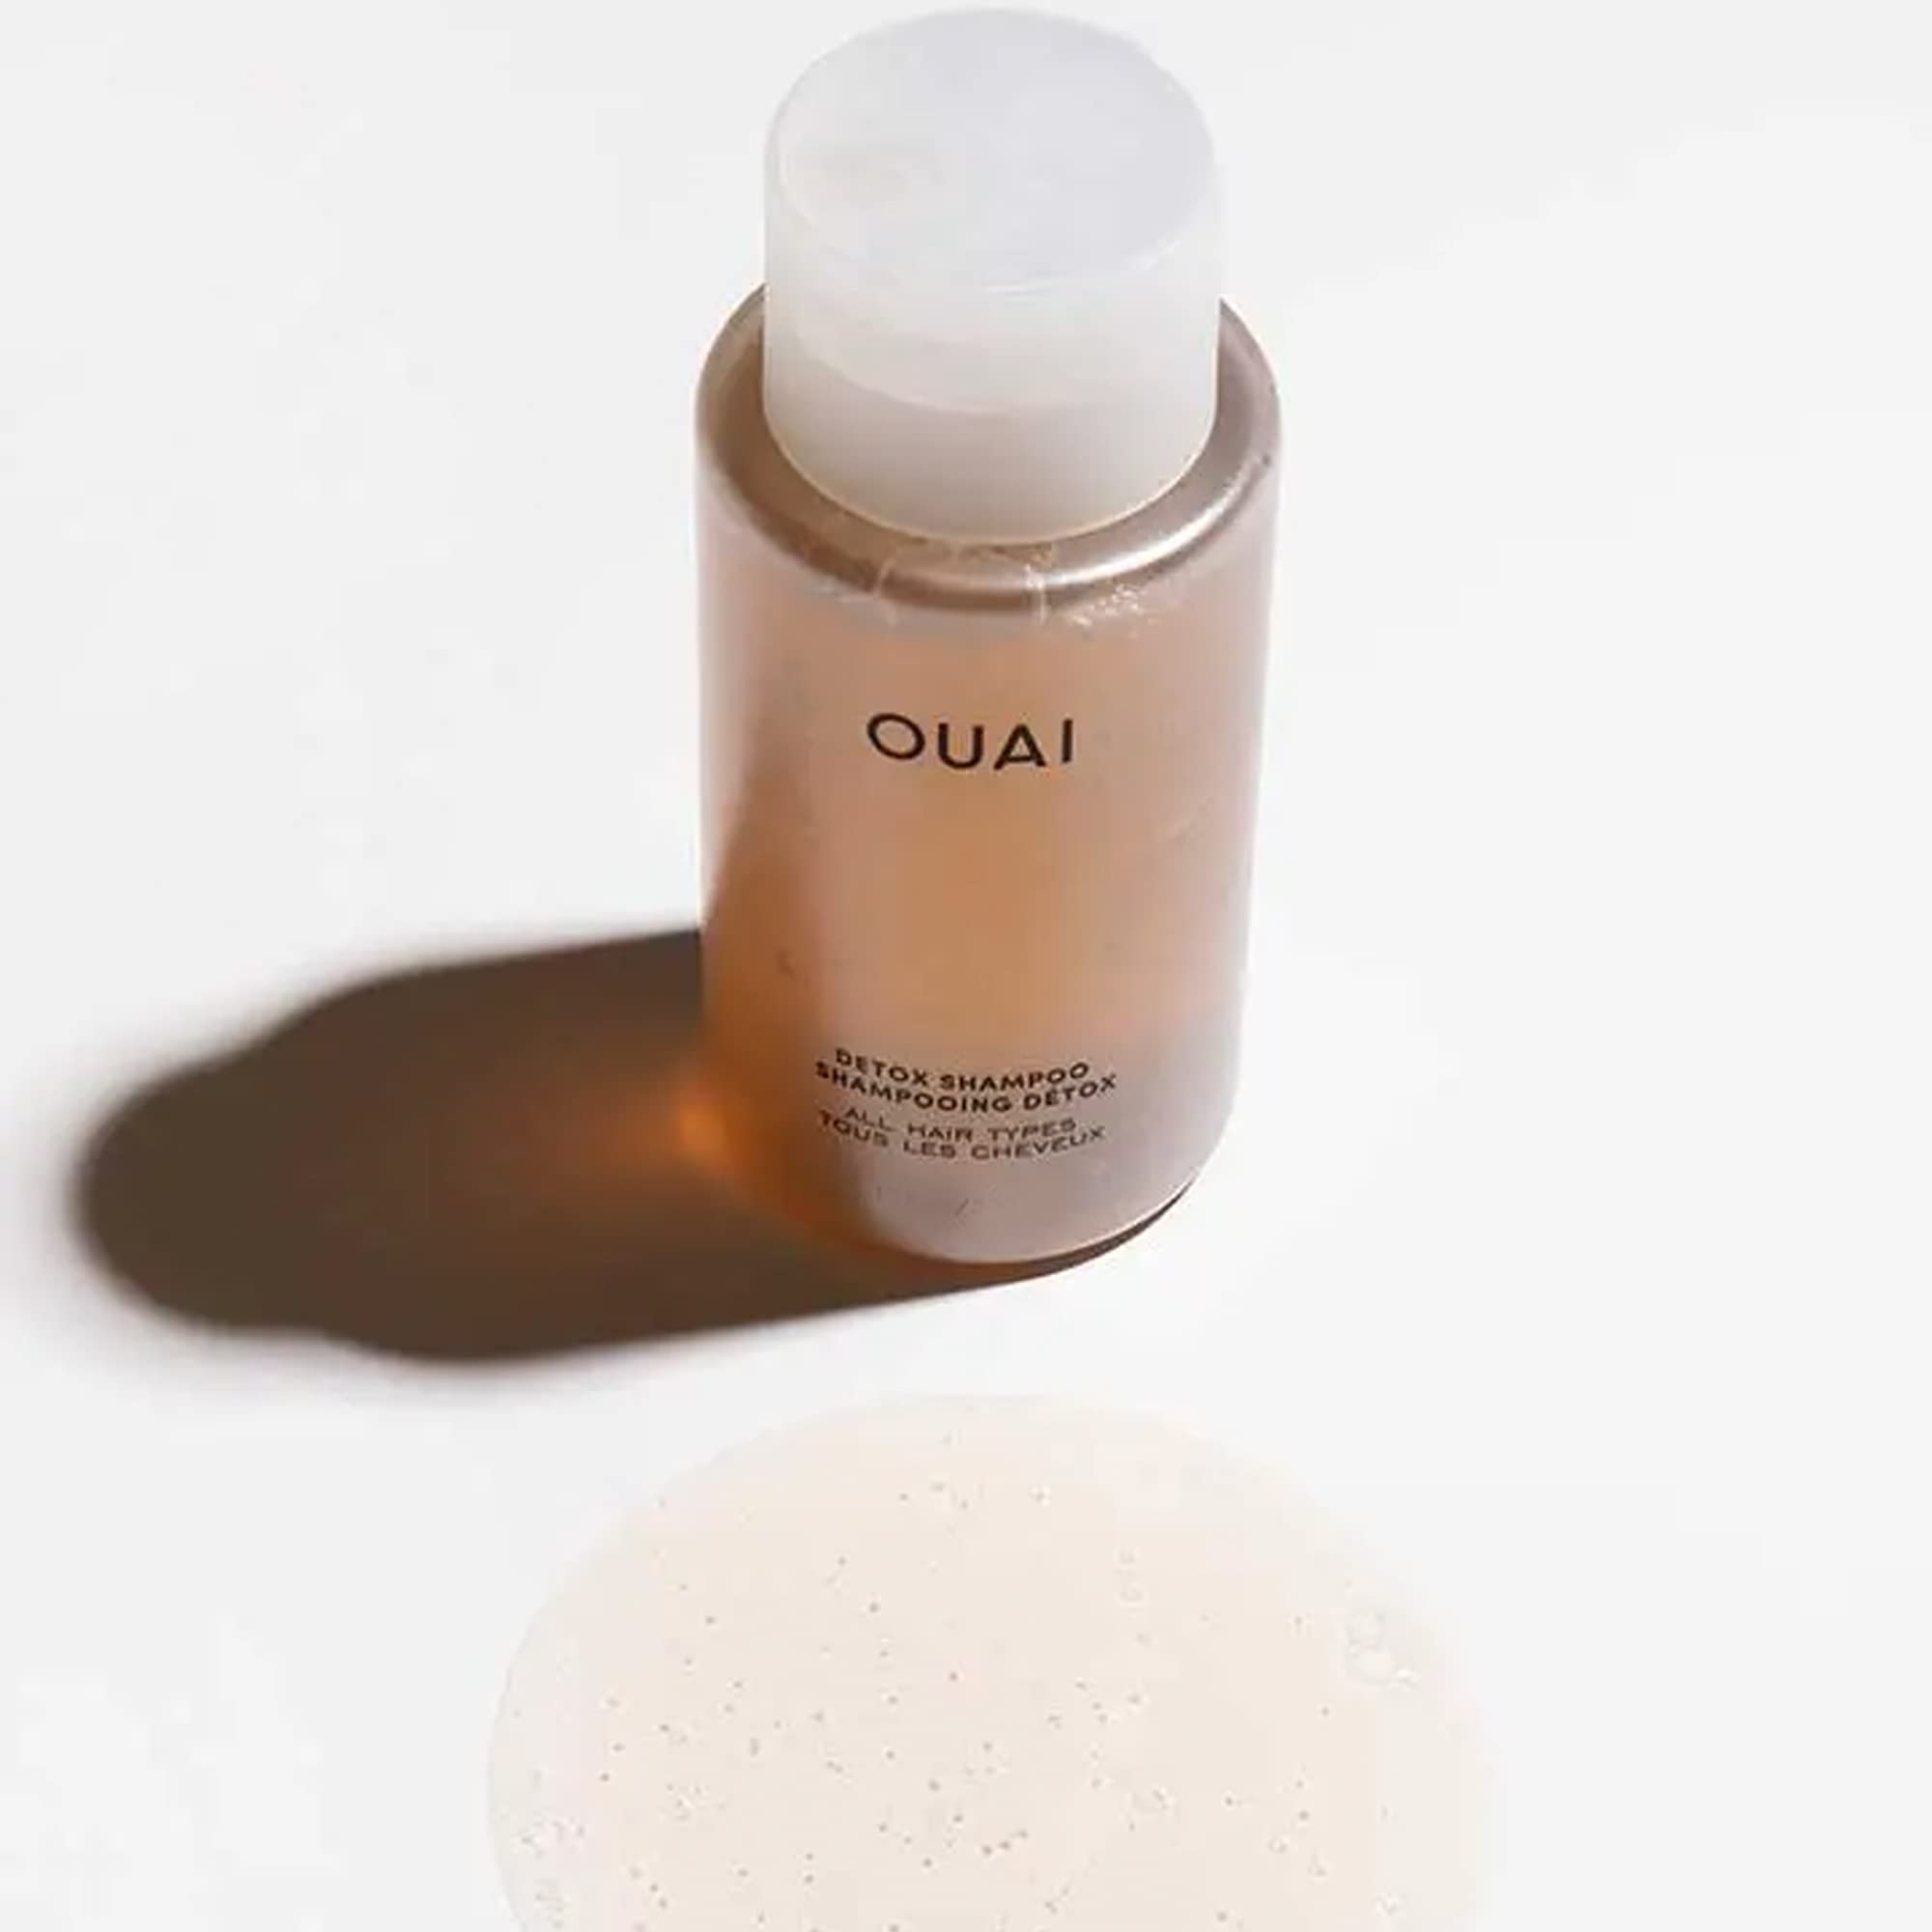 OUAI Detox Shampoo. Clarifying Cleanse for Dirt, Oil, Product and Hard Water Buildup. Get Back to Super Clean, Soft and Refreshed Locks (3 oz)